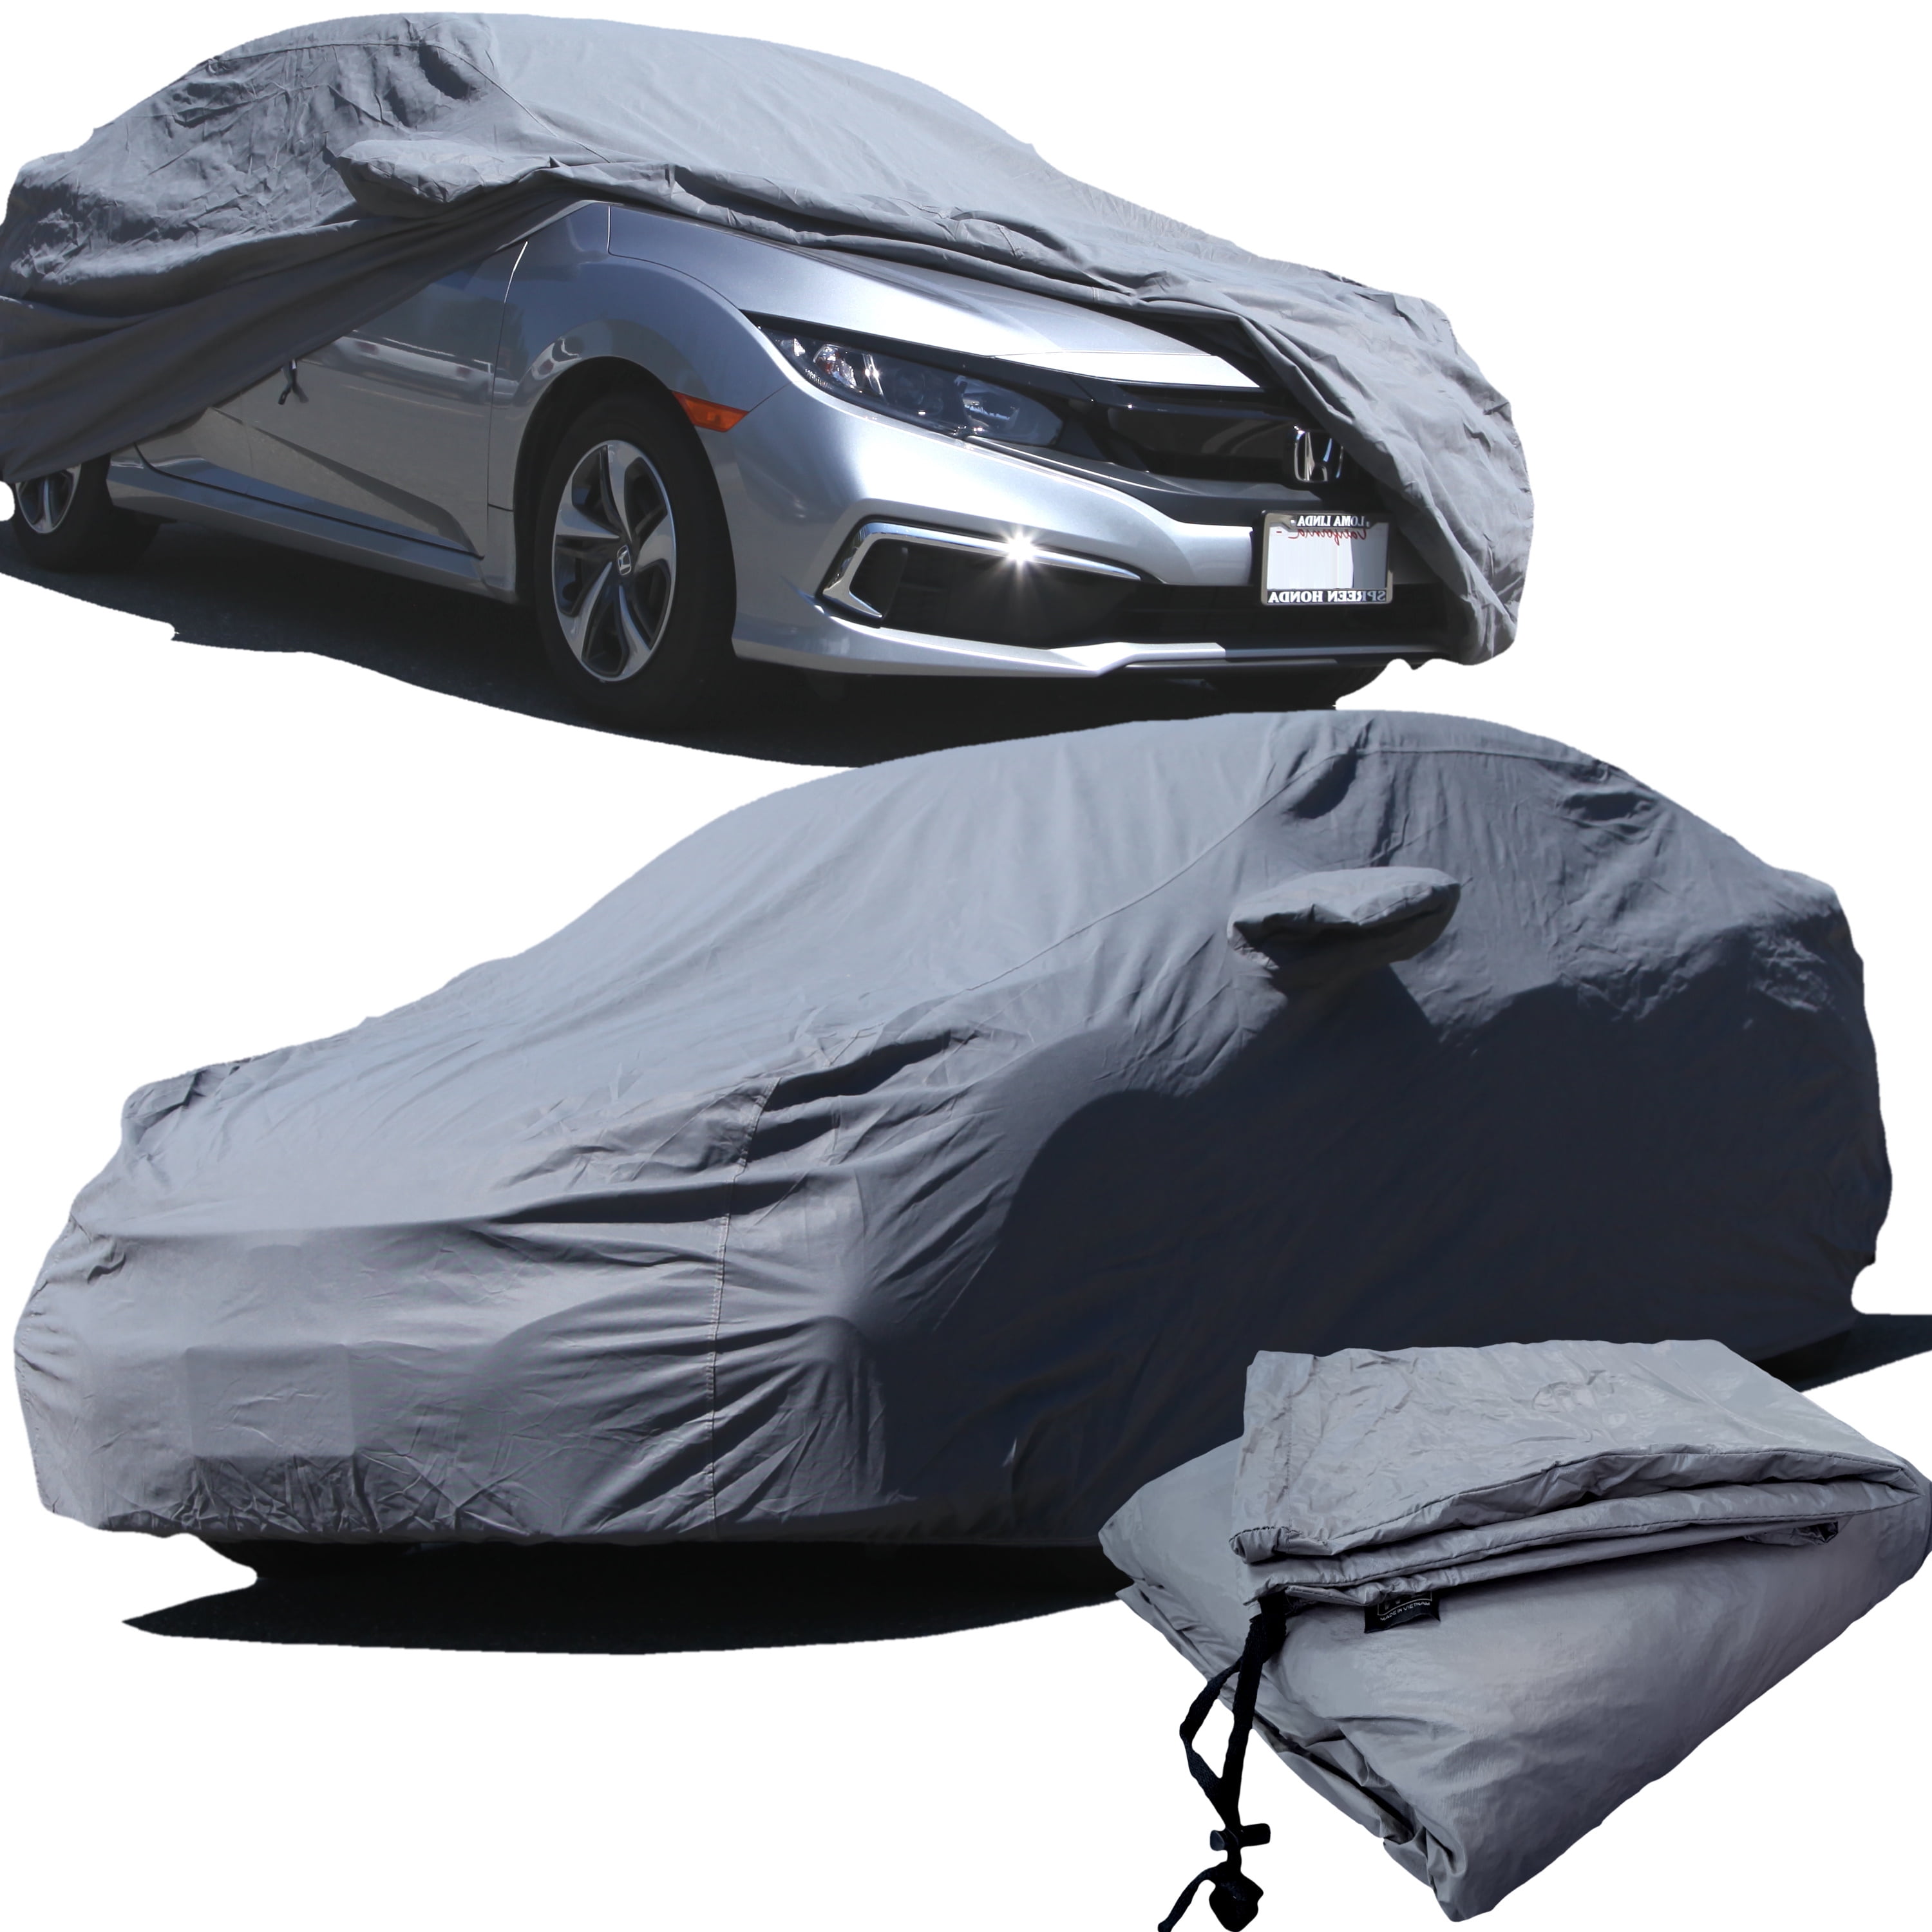 L Breathable Water Resistant Outdoor & Indoor Full Car Cover for Porsche 911 